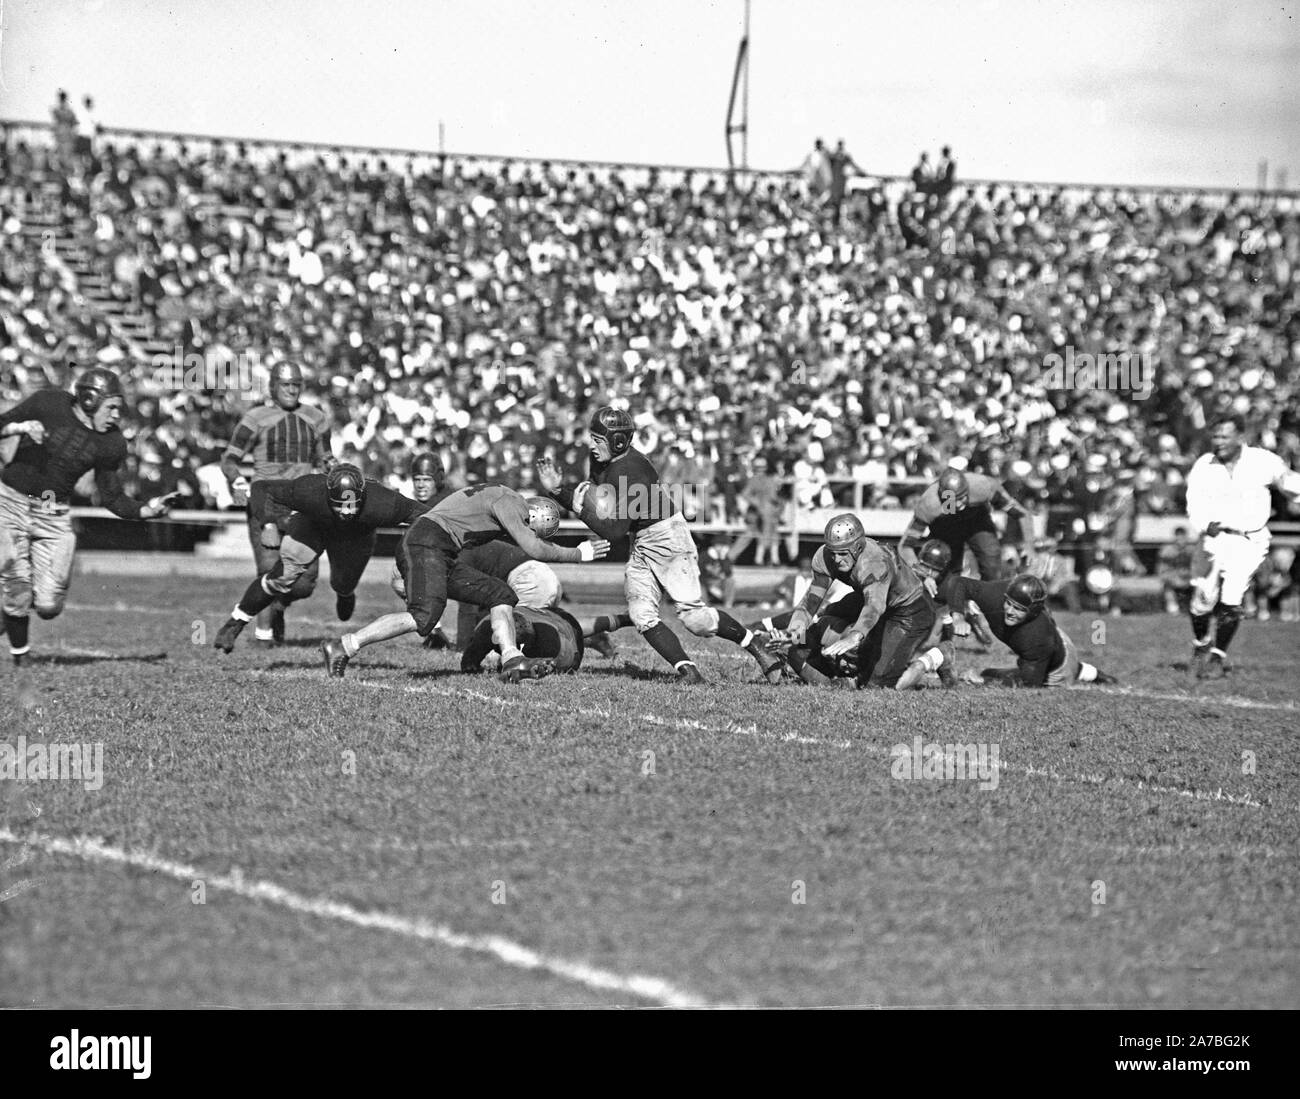 Running back Sneed Schmidt drives through the line in Navy's 18-6 defeat of William Mary to open the 1936 football season Stock Photo